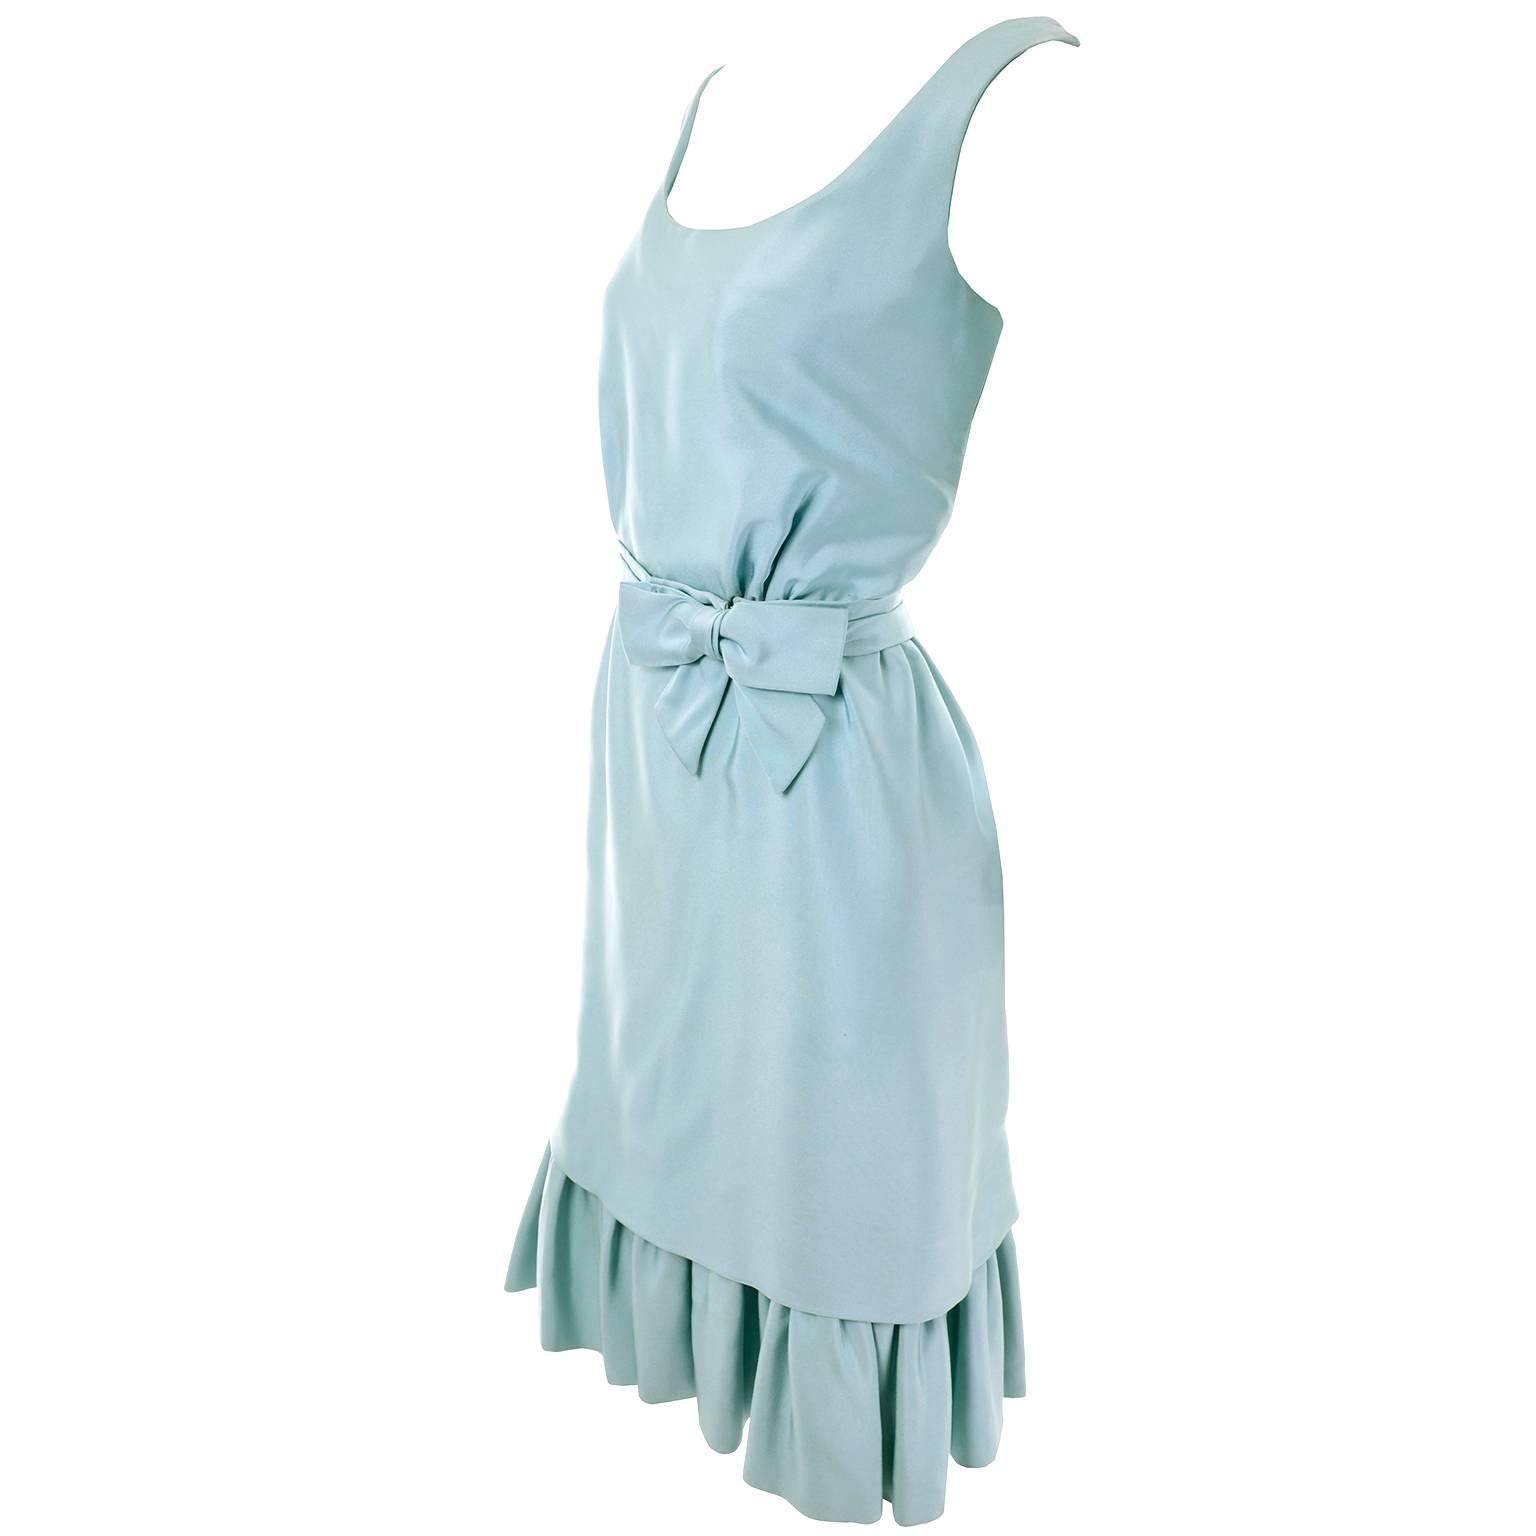 This is a stunning blue green vintage Jobere cocktail dress from the 1960's. The dress has a low back with a zipper and a fabric belt with a side front bow.  We love the ruffle at the bottom that is actually the bottom of an attached 